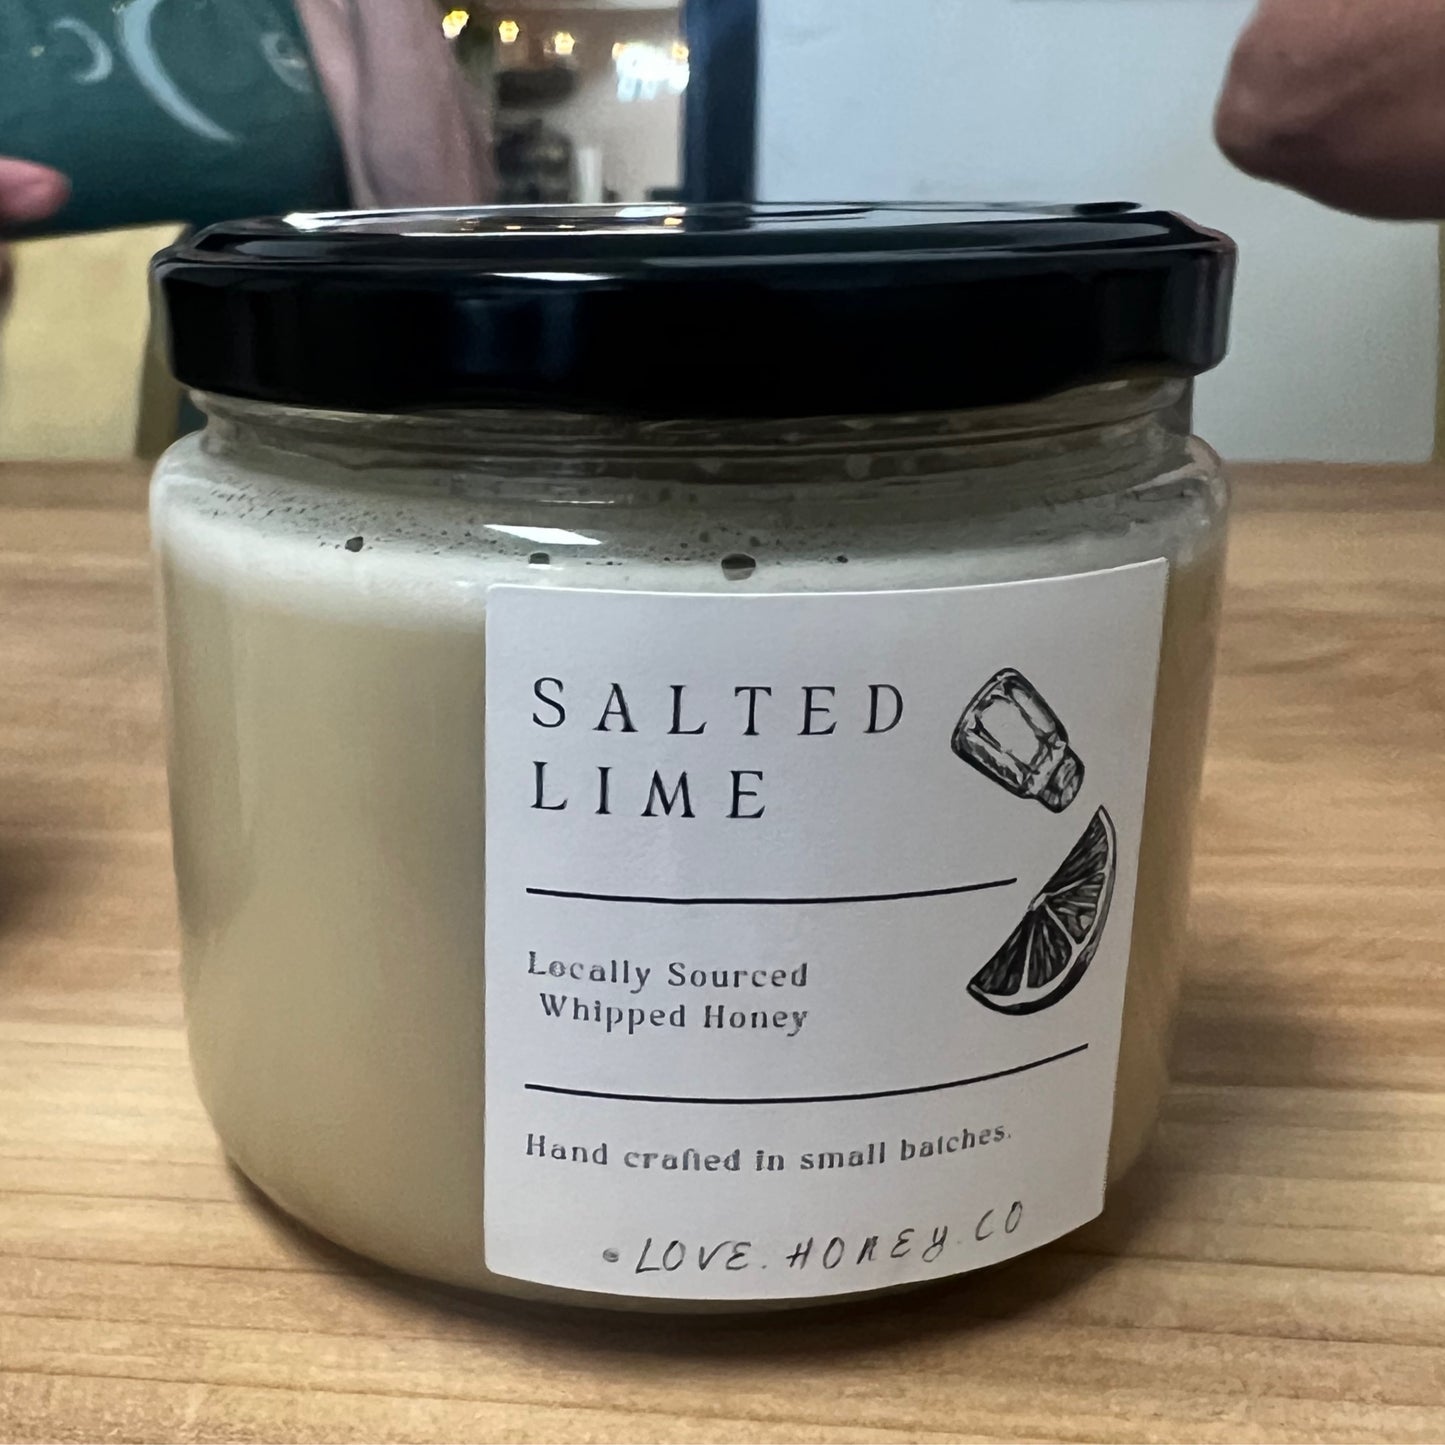 Salted Lime Whipped Honey